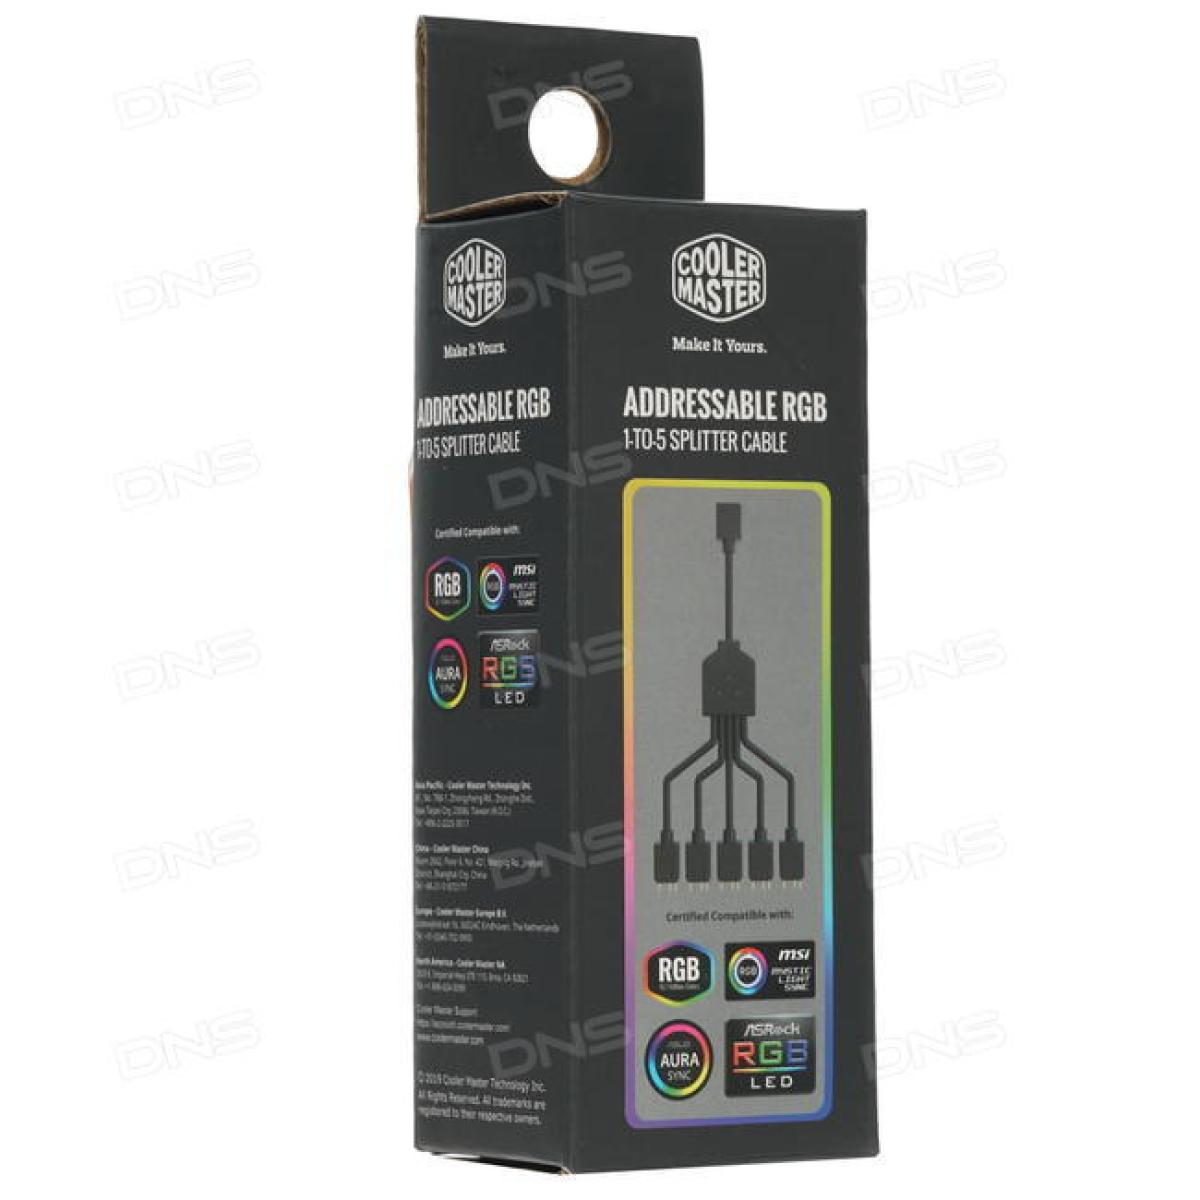 COOLER MASTER ADDRESSABLE RGB 1-TO-5 SPLITTER CABLE 58CM